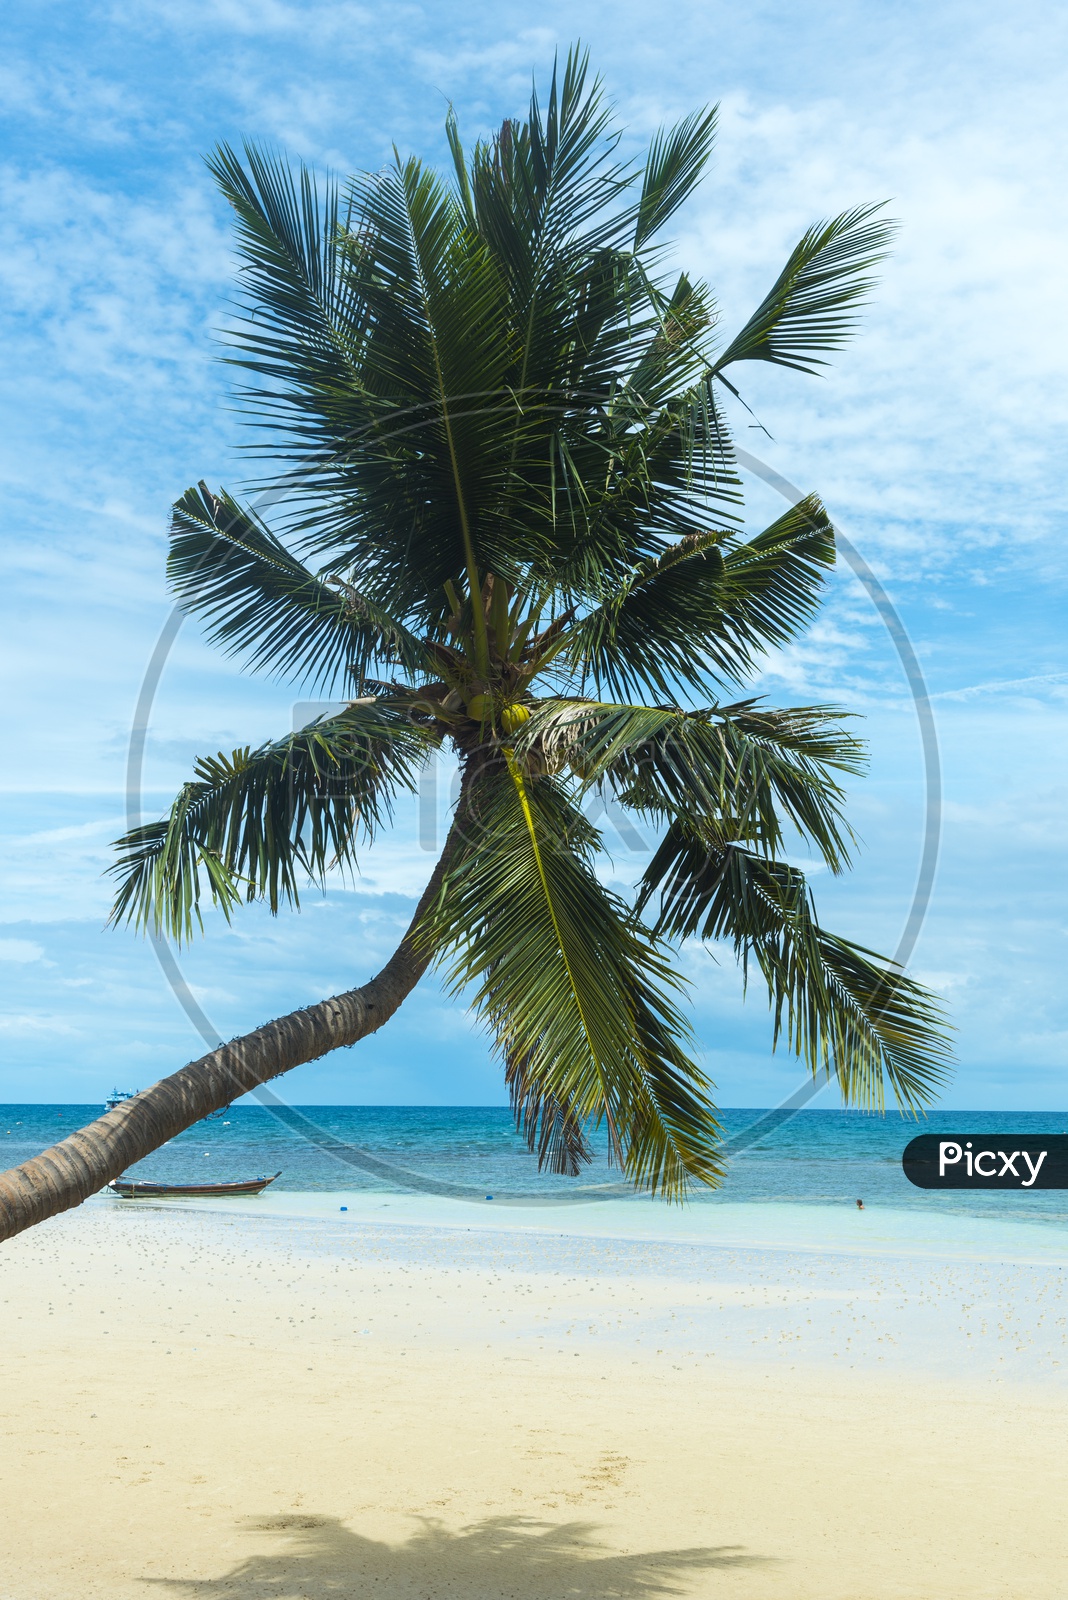 Coconut Tree In a Beach With Sea View